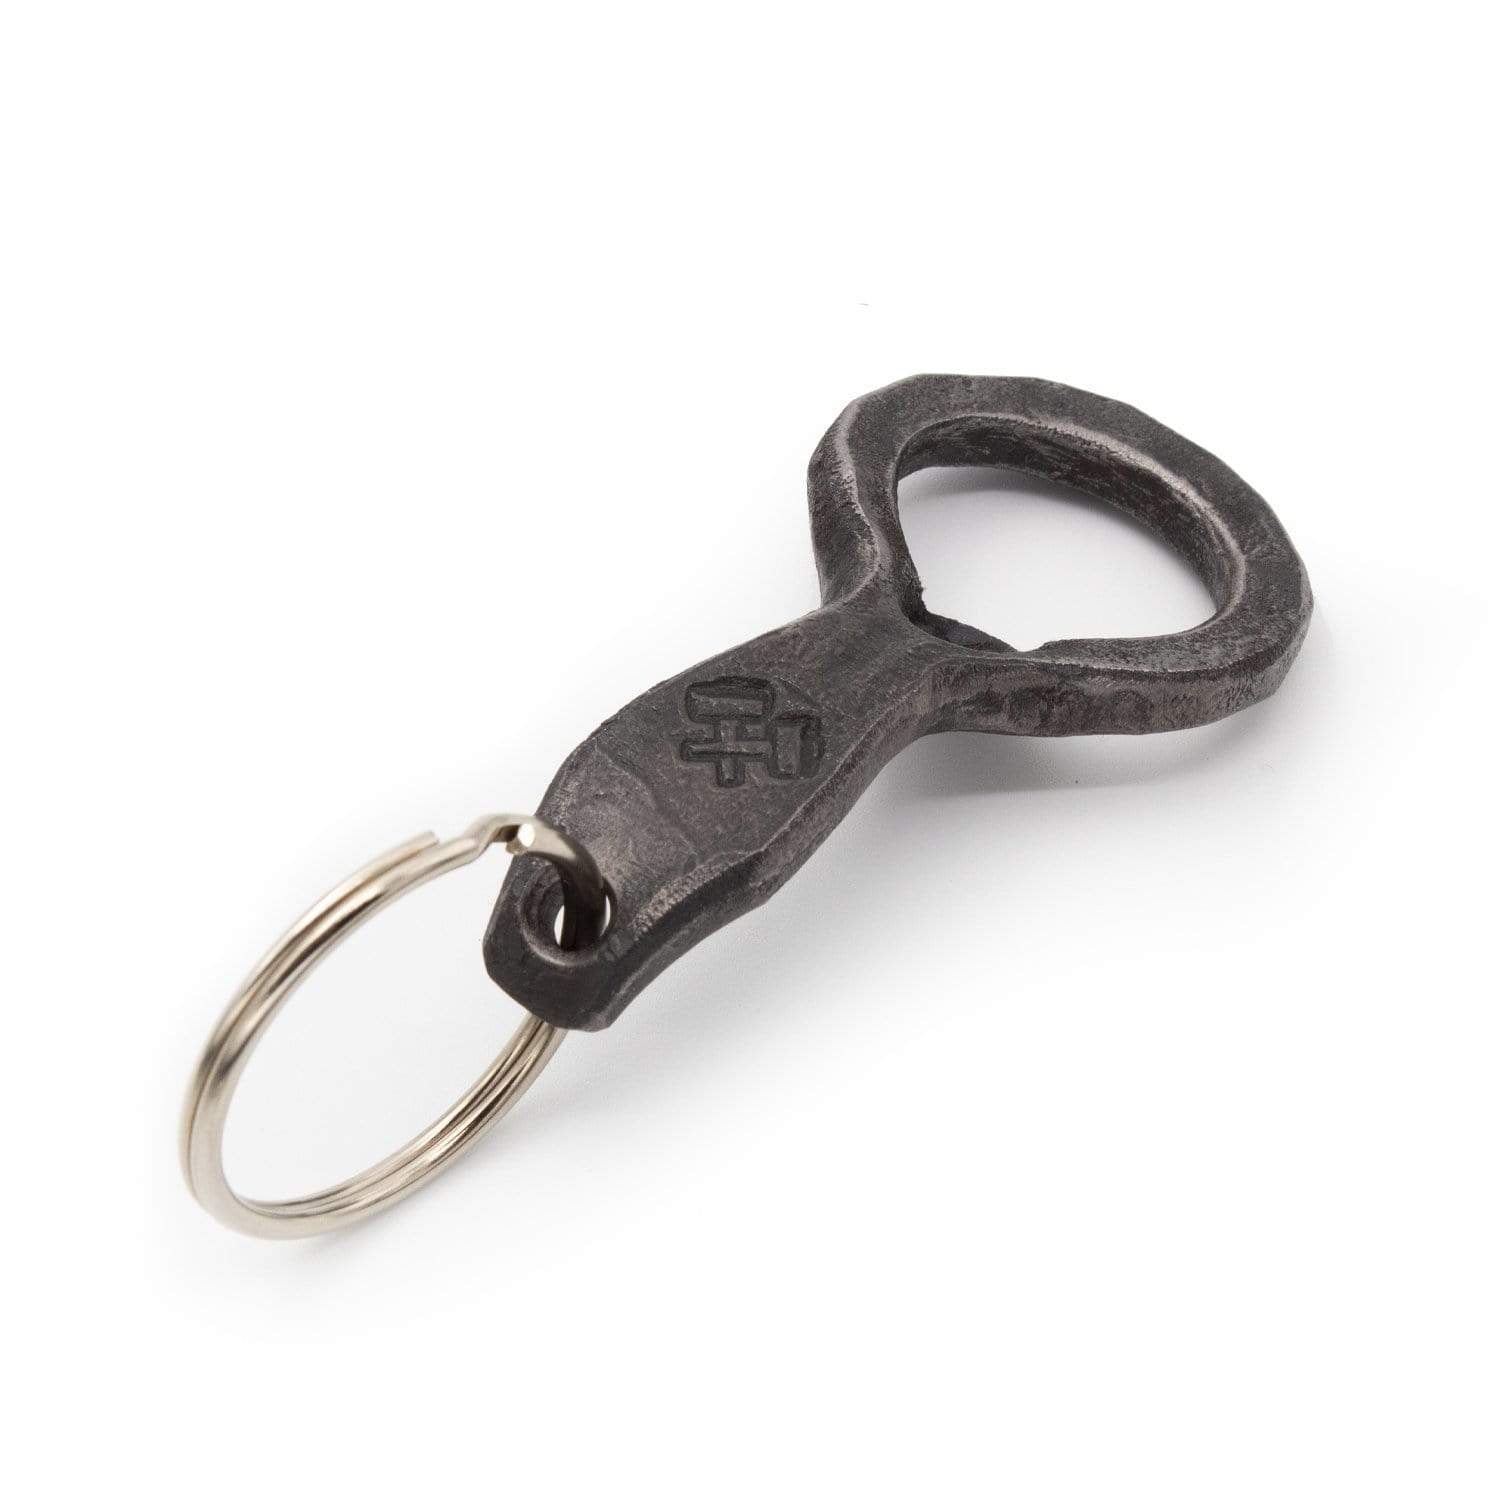 https://mainstreetforge.com/cdn/shop/products/main-street-forge-keychain-bottle-opener-hand-stamped-unique-heavy-duty-tool-hand-forged-by-blacksmith-in-the-usa-main-street-forge-14253522681996_1600x.jpg?v=1580824731